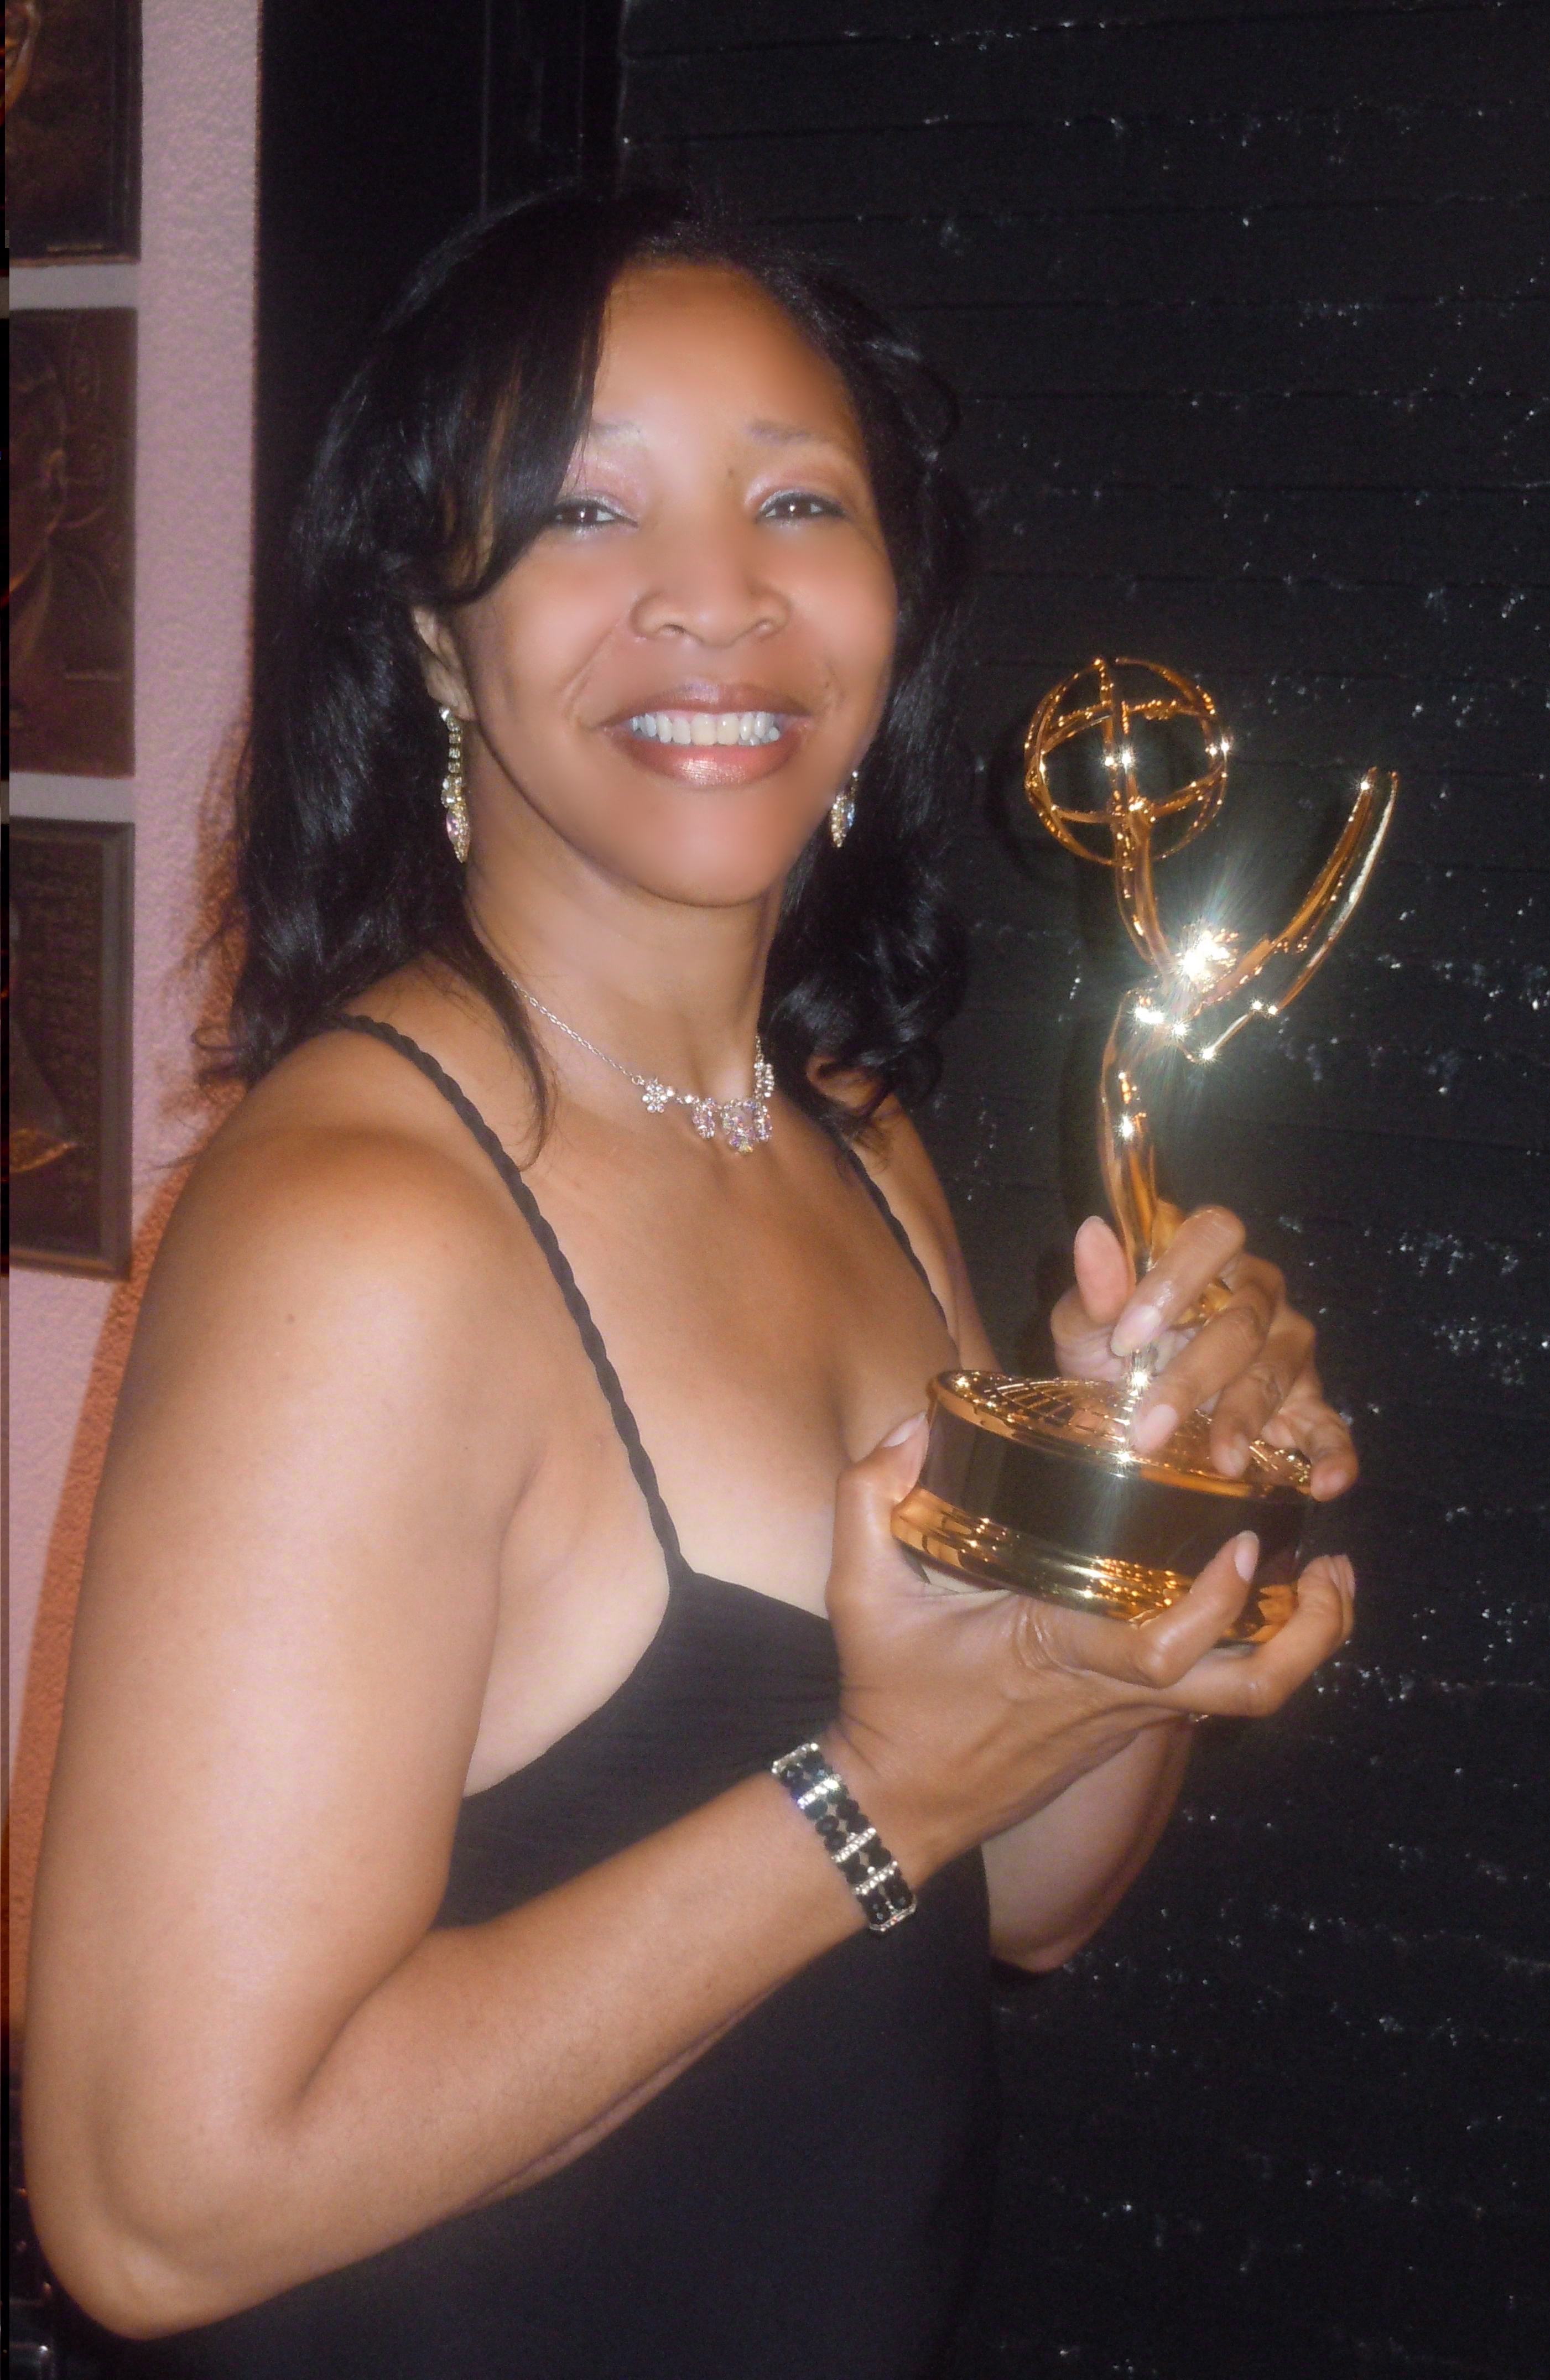 After winning the Emmy for Best PSA, Toy Loan, through Women in Film